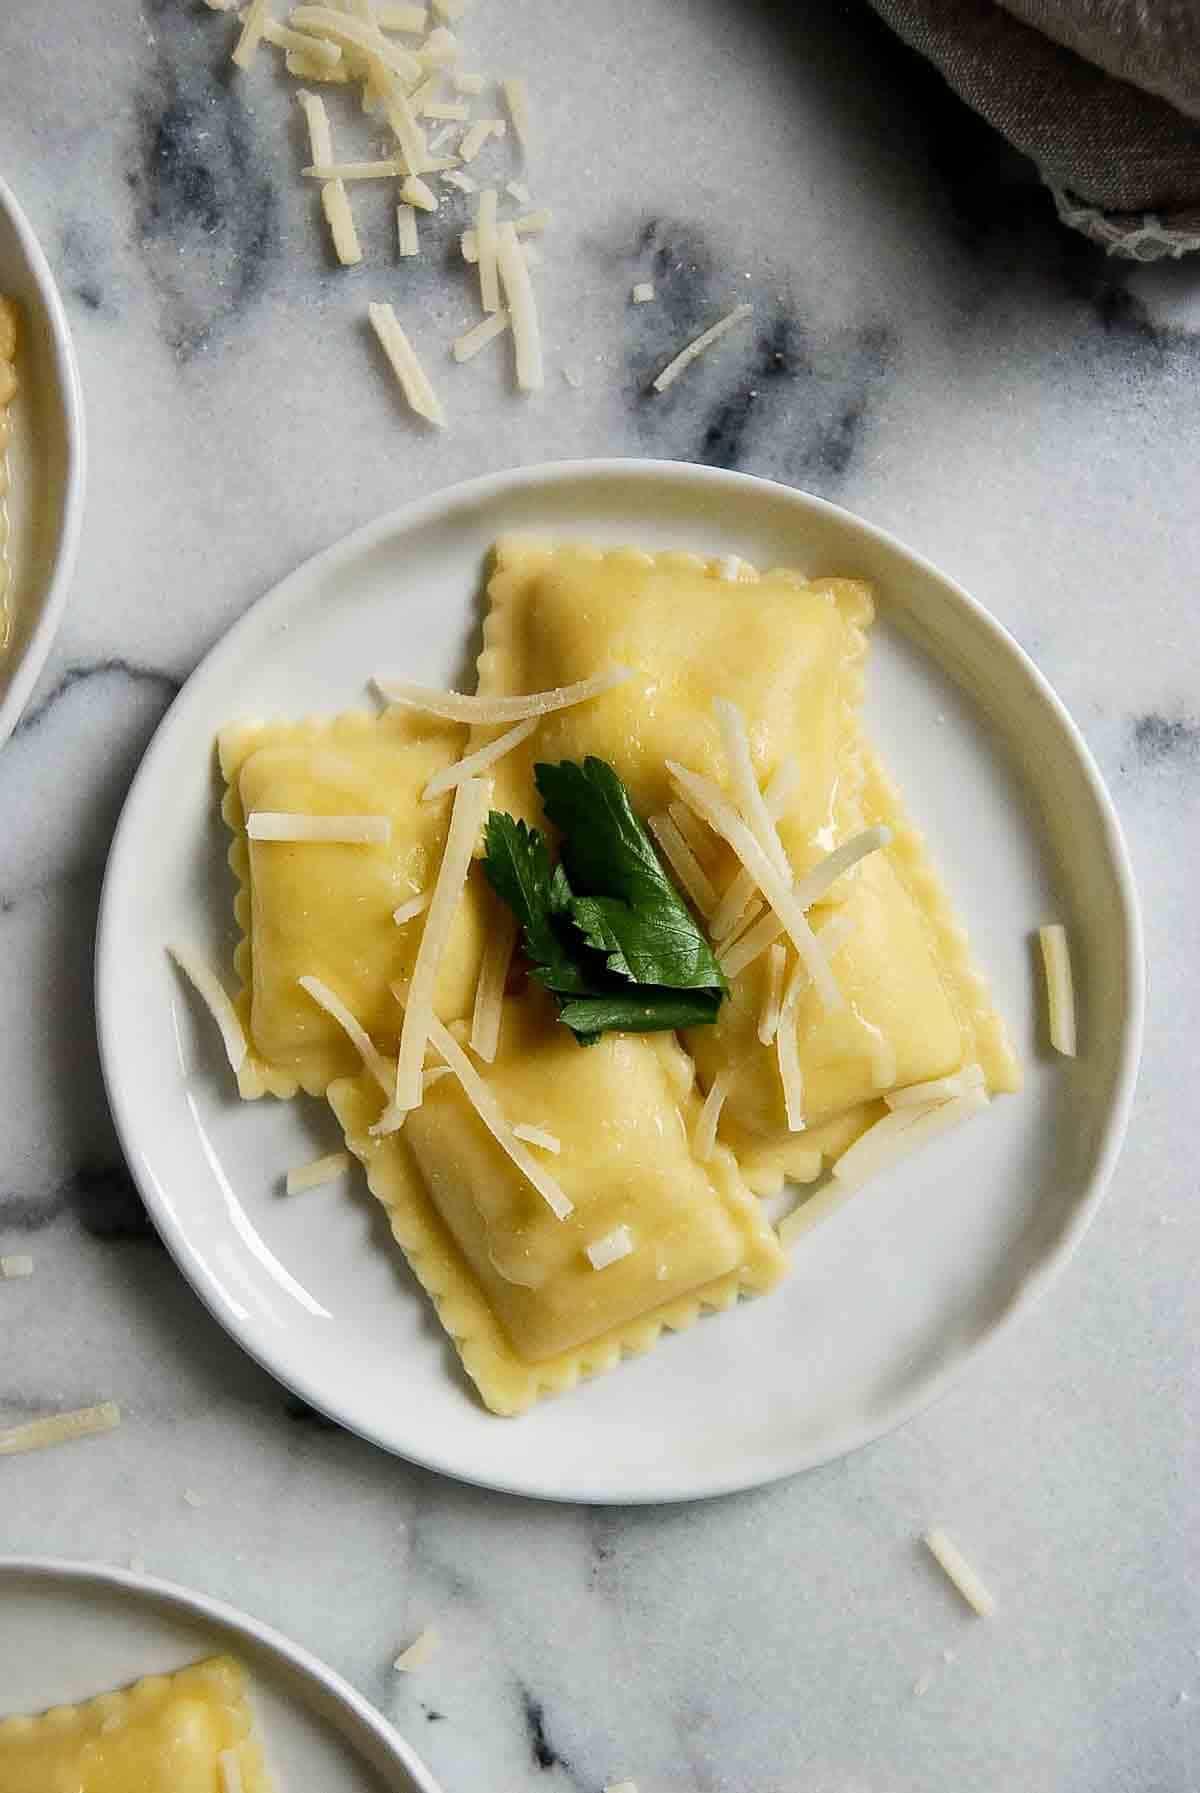 plate of cheese ravioli with garlic butter sauce, parmesan cheese and parsley. Cooking Frozen Cheese Ravioli is so easy and there are so many different ways you can use it! Below are my five favorite ways to cook frozen cheese ravioli for an easy meal or appetizer. Intro Frozen cheese ravioli is one of those freezer staples that I think everyone should have. It provides you with a simple way to make an endless variety of meals. Not only does it cook in minutes, but it’s incredibly versatile and can be used in so many ways to create a delicious dinner or appetizer. I’ve used it on its own in a simple pasta sauce, breaded baked to use as an appetizer with some marinara dipping sauce, or even as an easy substitute for noodles and ricotta cheese in a Lazy Lasagna. The options are endless and if you’re a parent, or simply a last-minute kind of cook (I happen to be both), frozen cheese ravioli is something you’ll want to have on hand almost all of the time. (You’ll always find a package of it in my freezer!). Why Use Frozen Ravioli? There are so many reasons this easy pasta has become a staple in our house: Cooks Fast. Sure, you can buy premade fresh ravioli, which probably tastes better, but if it’s speed you’re after, you can